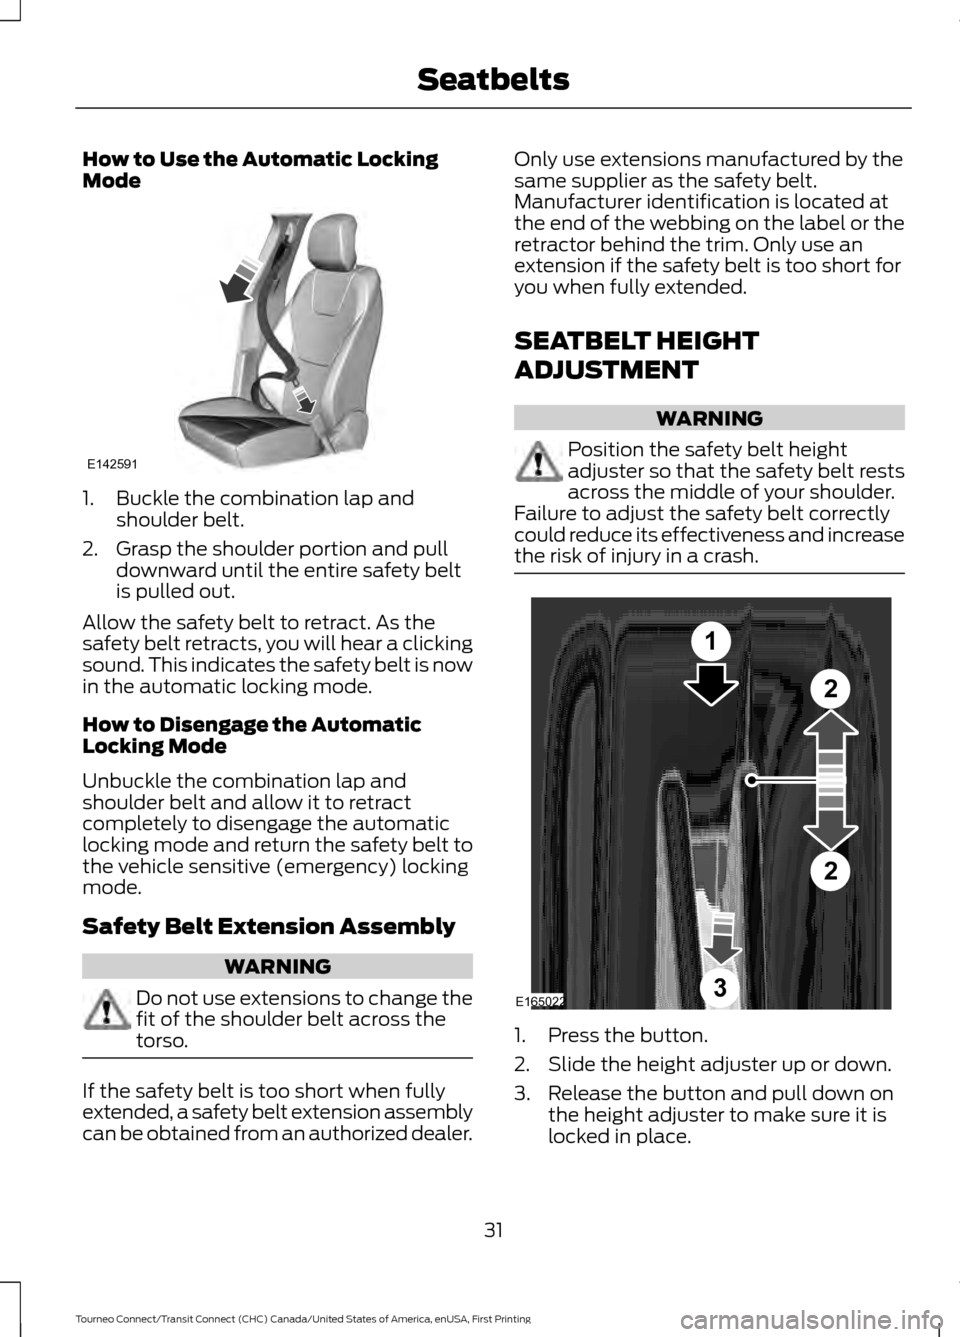 FORD TRANSIT CONNECT 2016 2.G Owners Manual How to Use the Automatic Locking
Mode
1. Buckle the combination lap and
shoulder belt.
2. Grasp the shoulder portion and pull downward until the entire safety belt
is pulled out.
Allow the safety belt